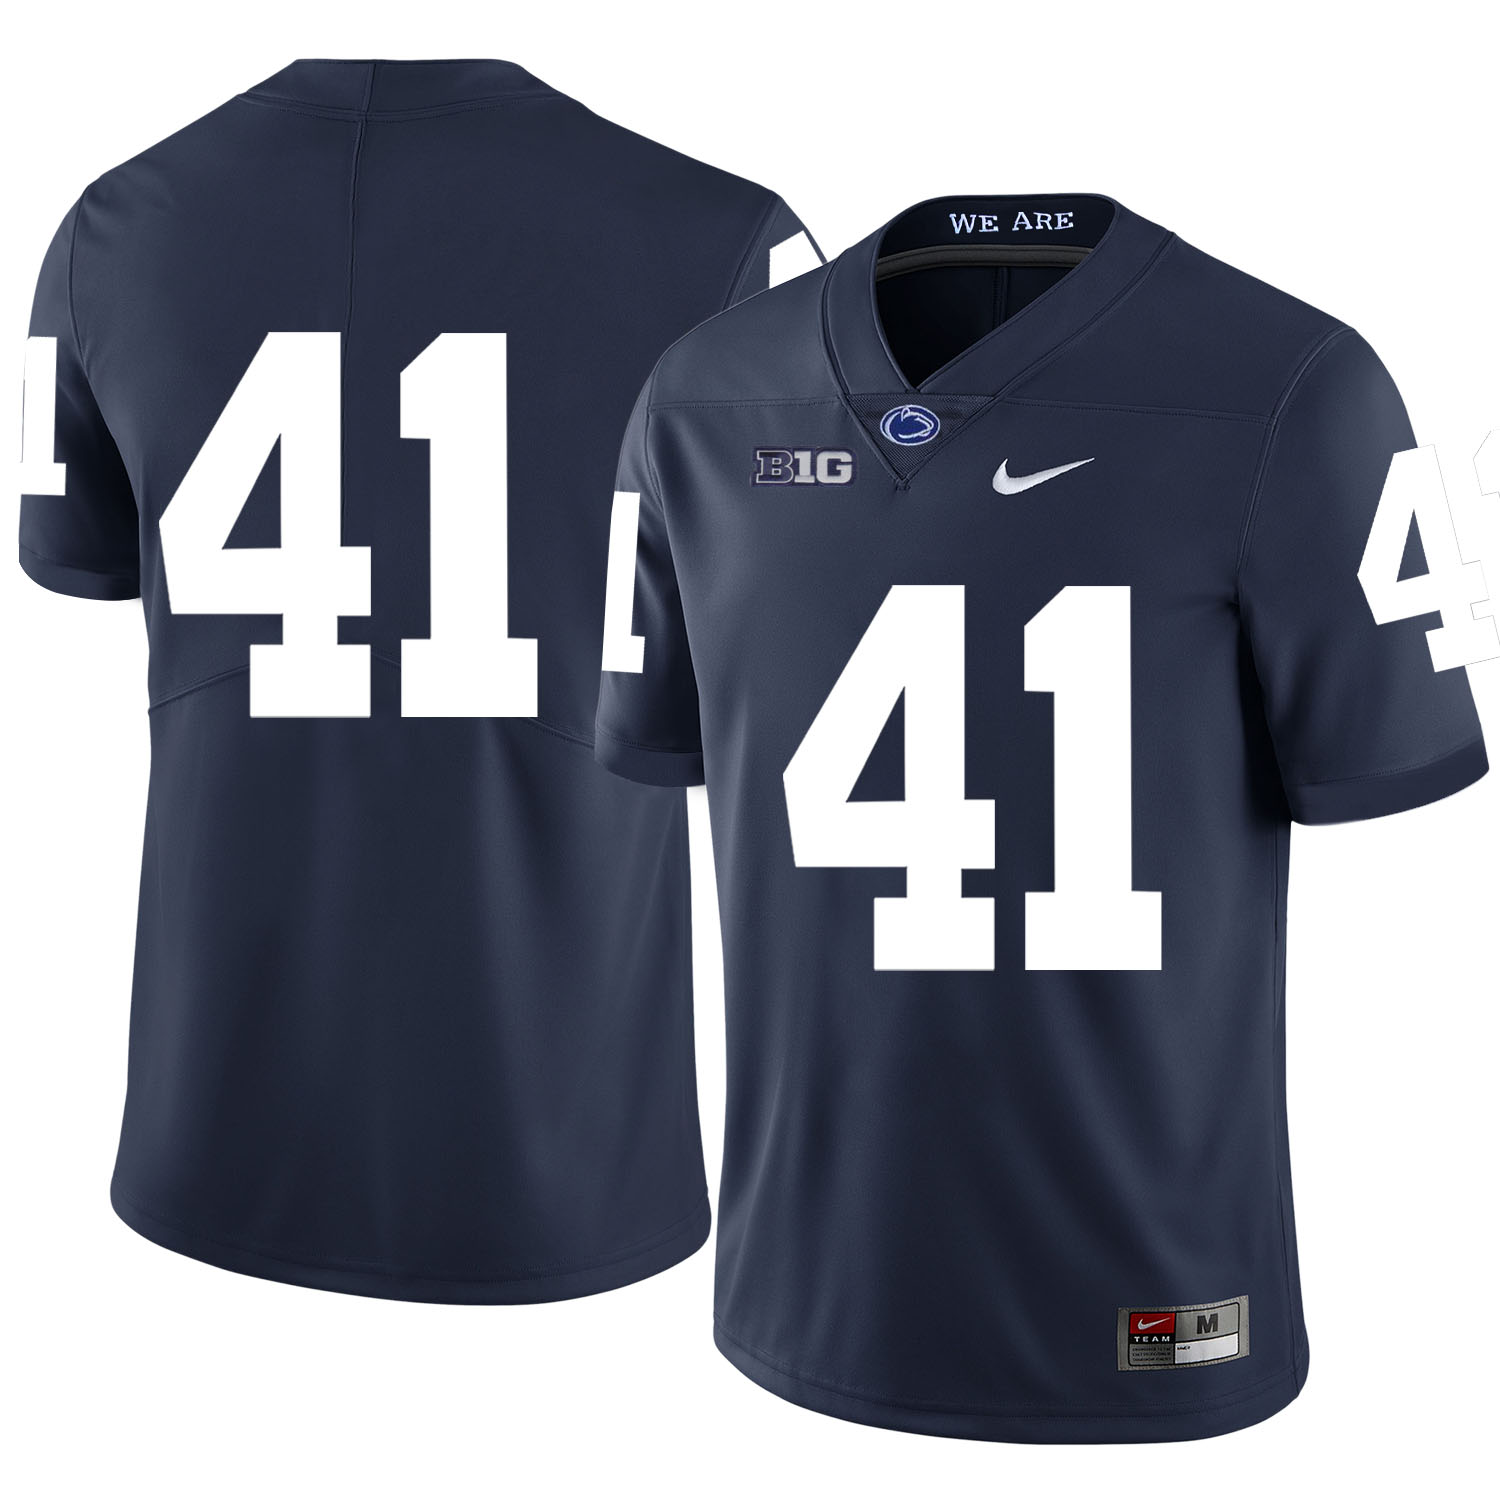 Penn State Nittany Lions 41 Parker Cothren Navy Nike College Football Jersey